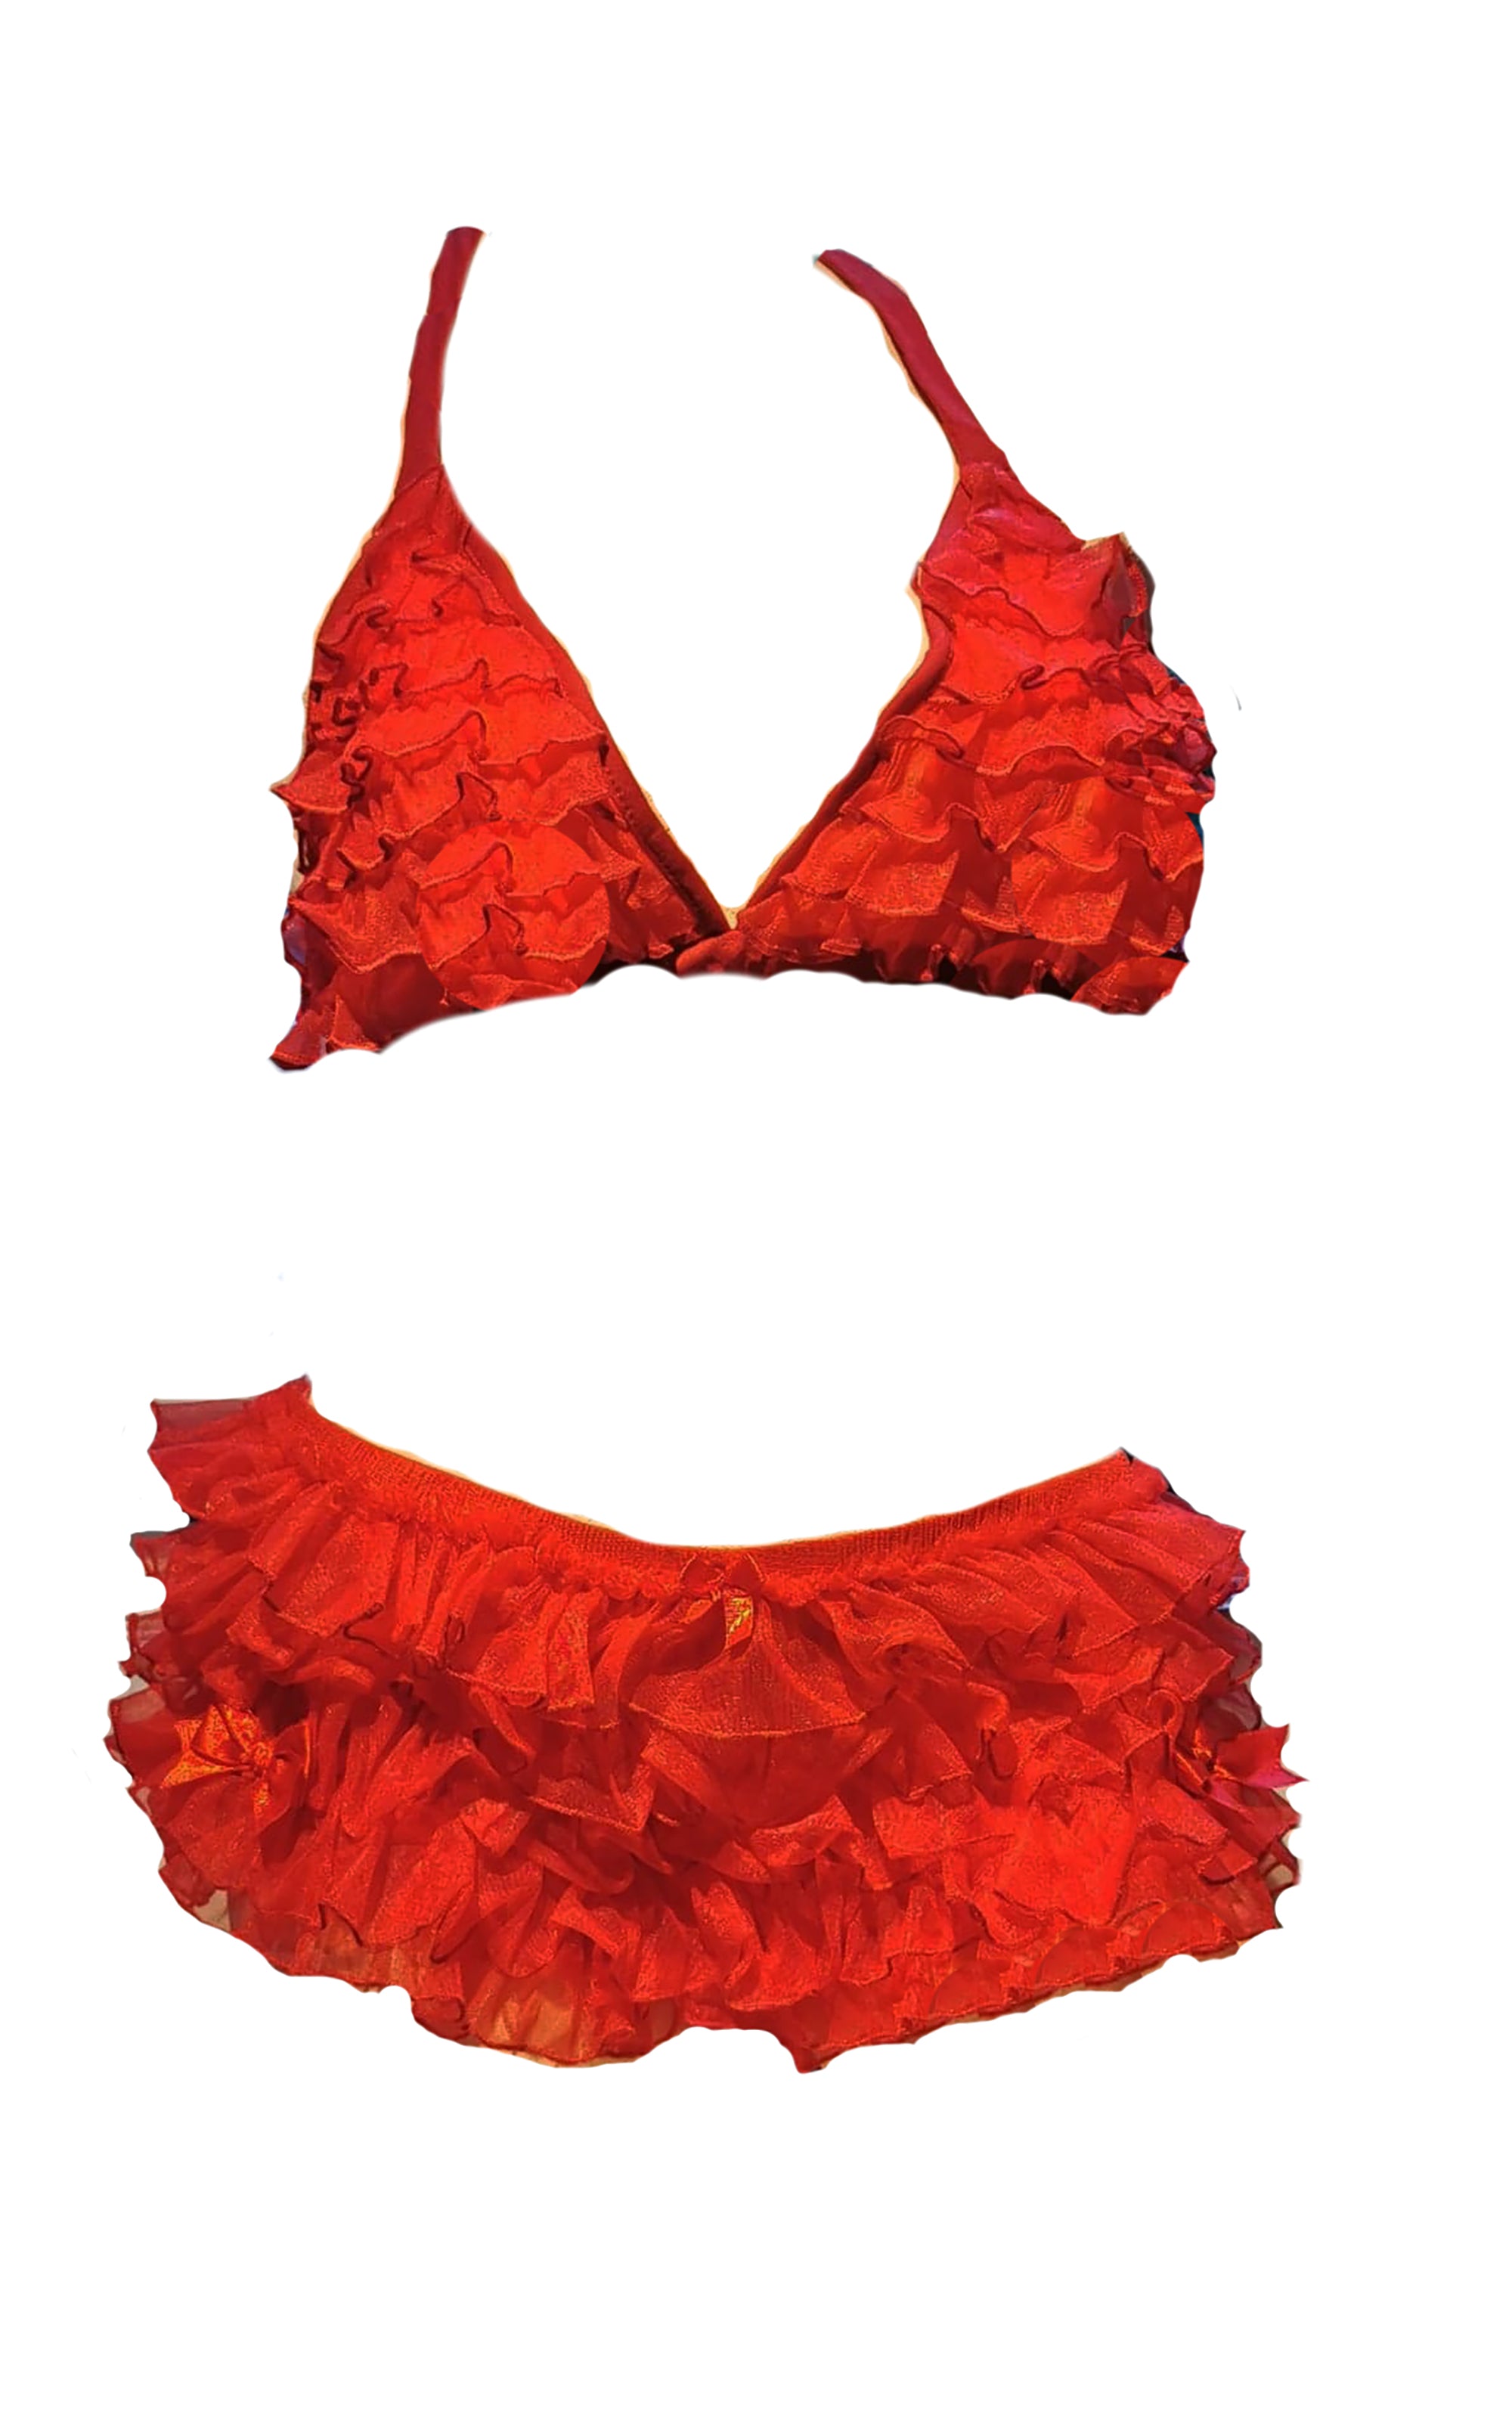 Classic Frilly Bra and Knicker Set, Burlesque Lingerie